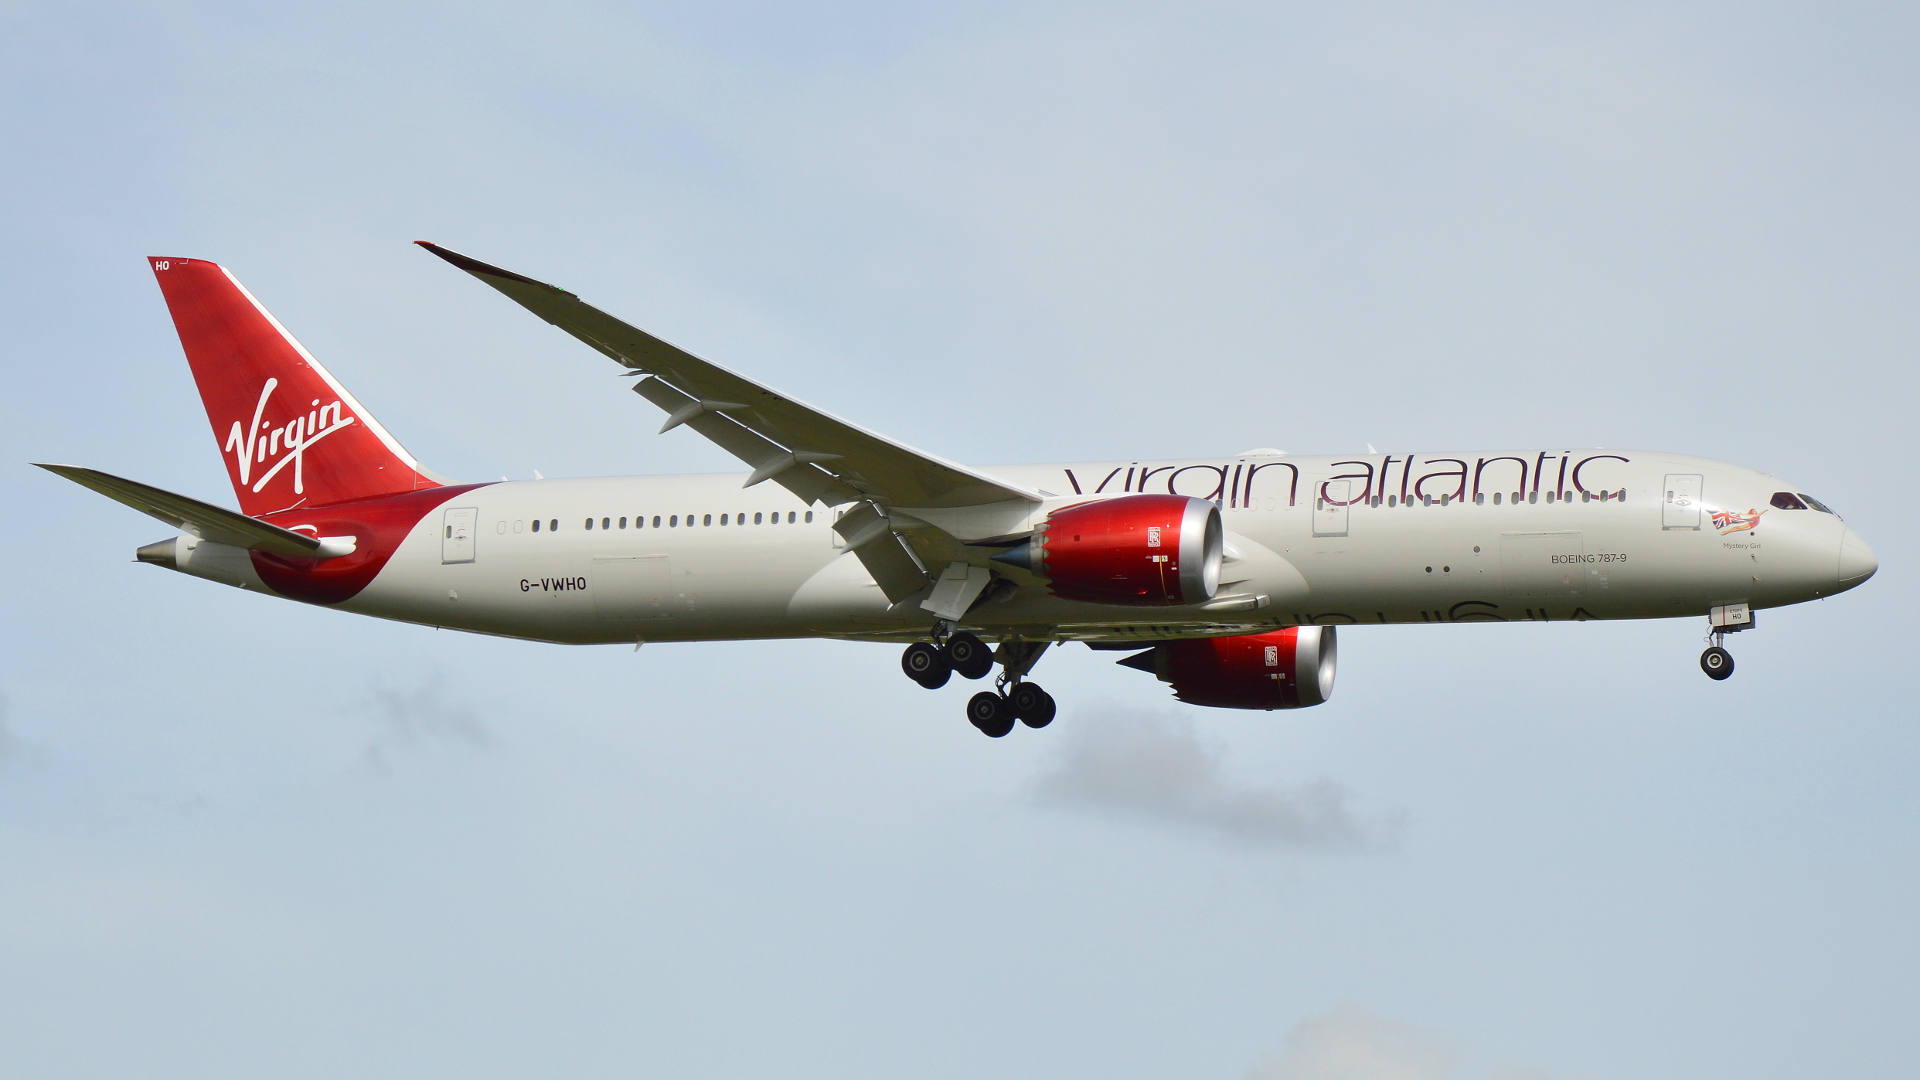 INCIDENT A drone came within 10 feet of a Virgin Atlantic Dreamliner on approach to London Heathrow Airport AIRLIVE